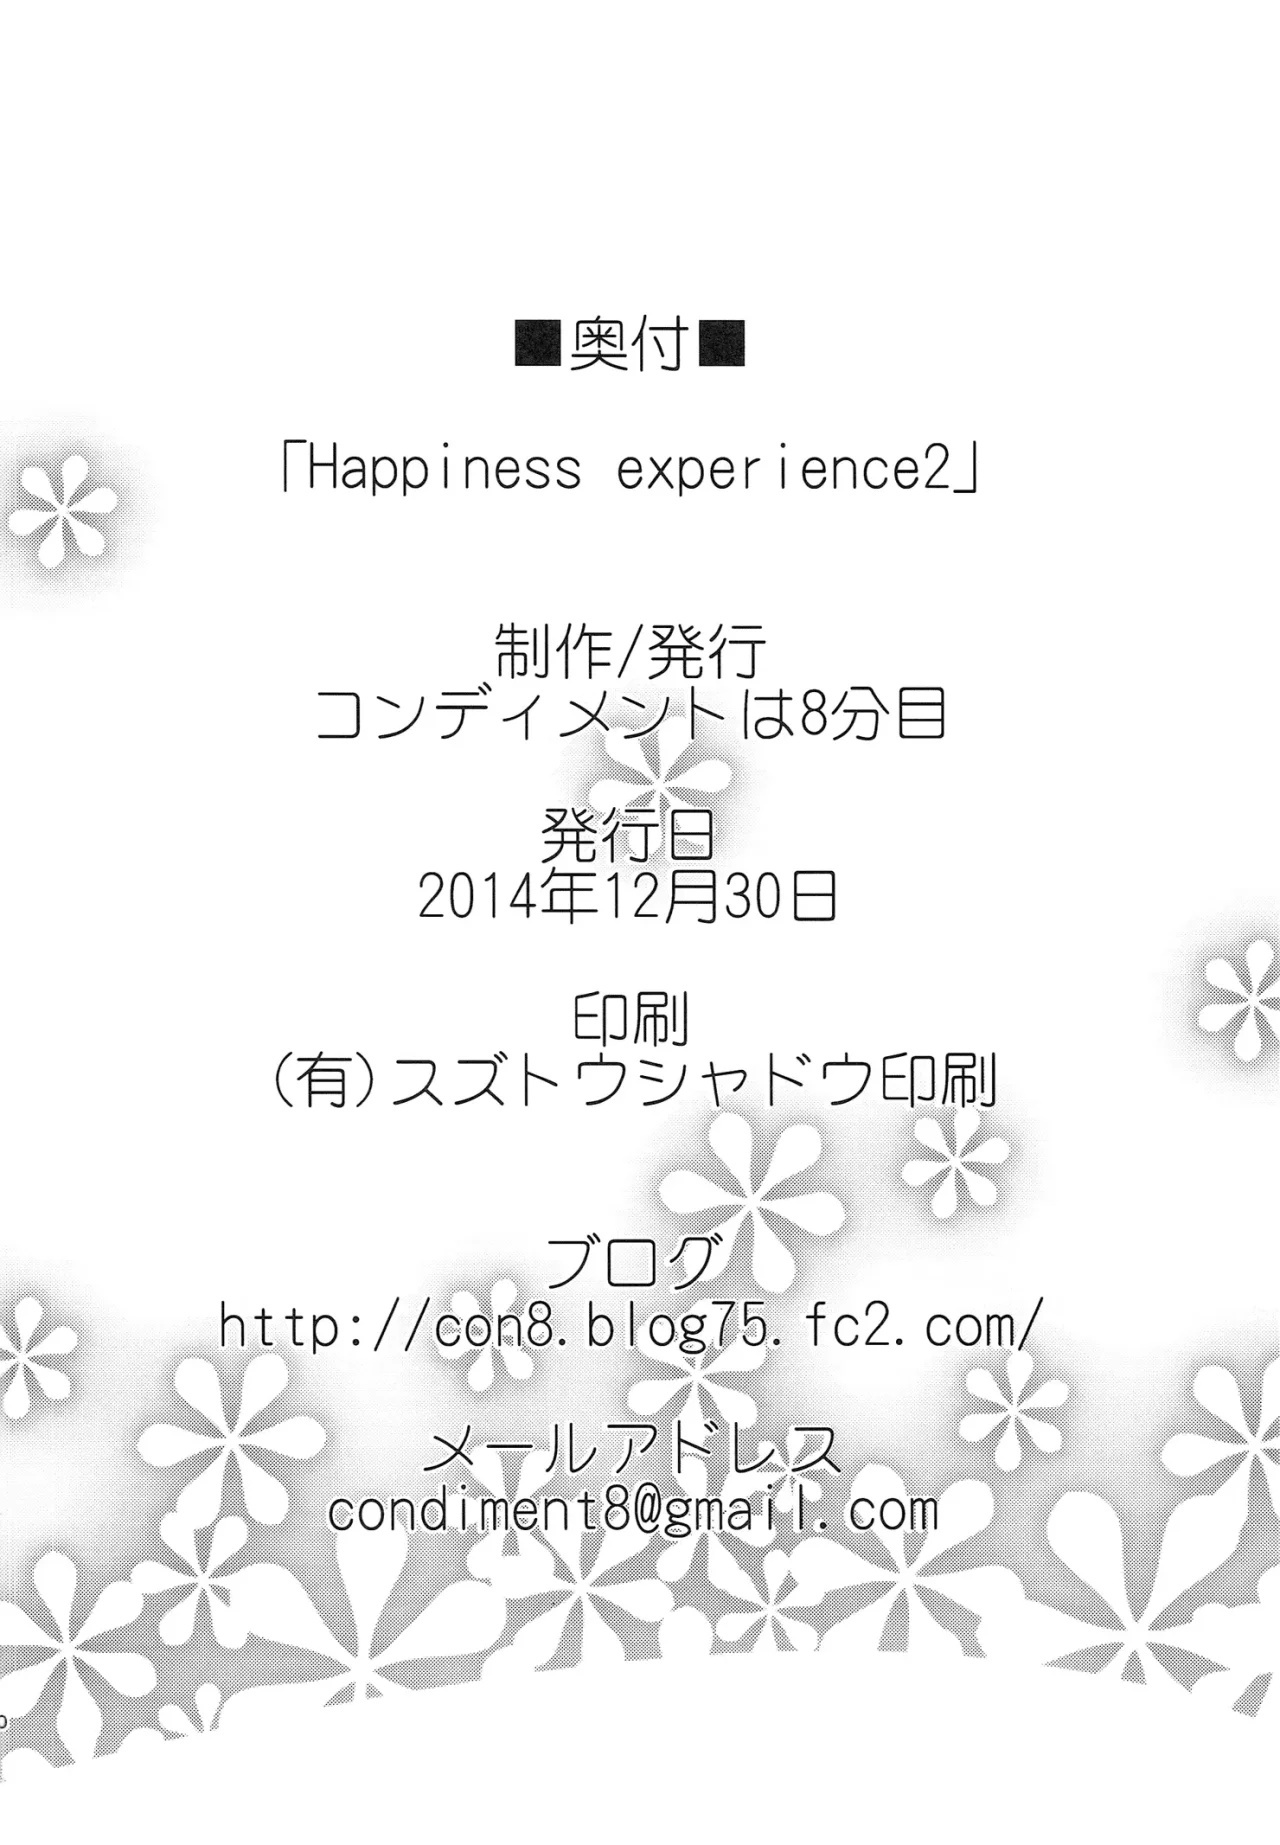 Happiness experience 1 y 2 - 66